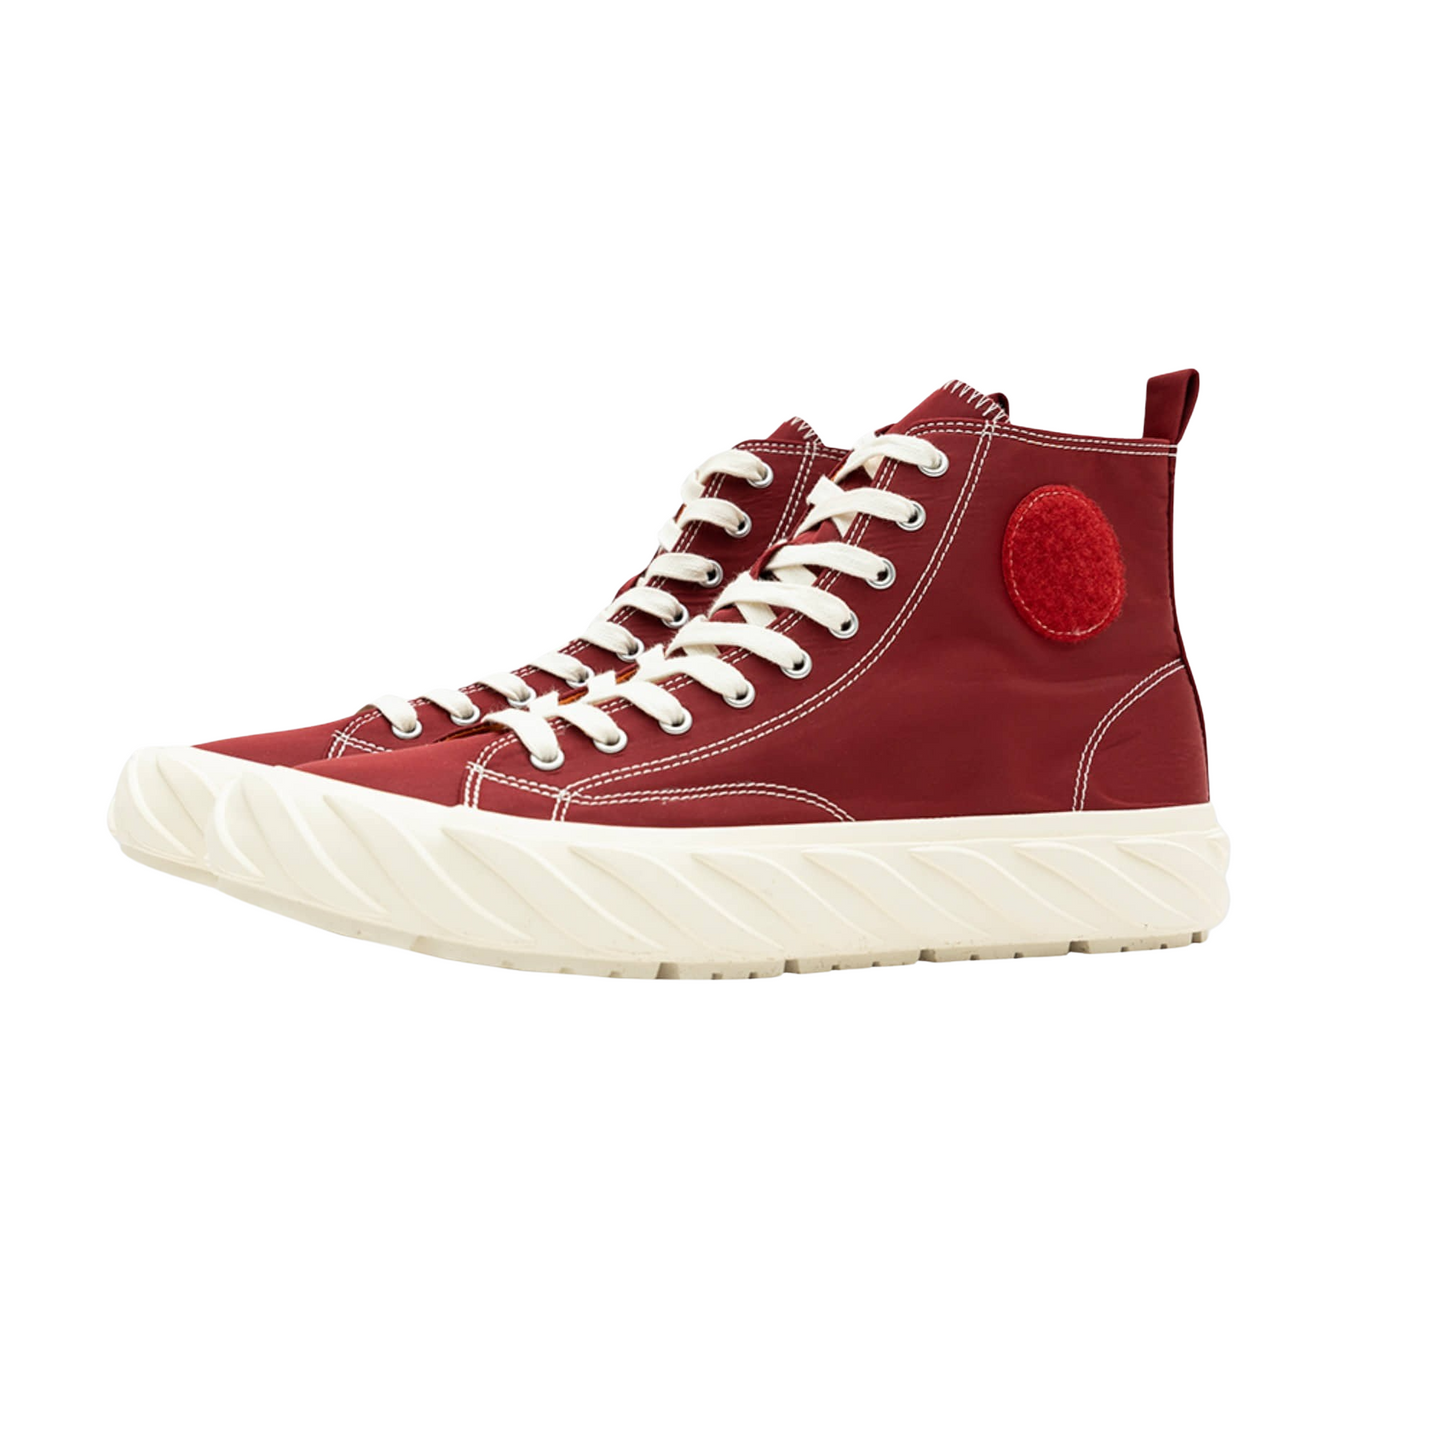 AGE SNEAKERS High Top MA-1 Burgandy